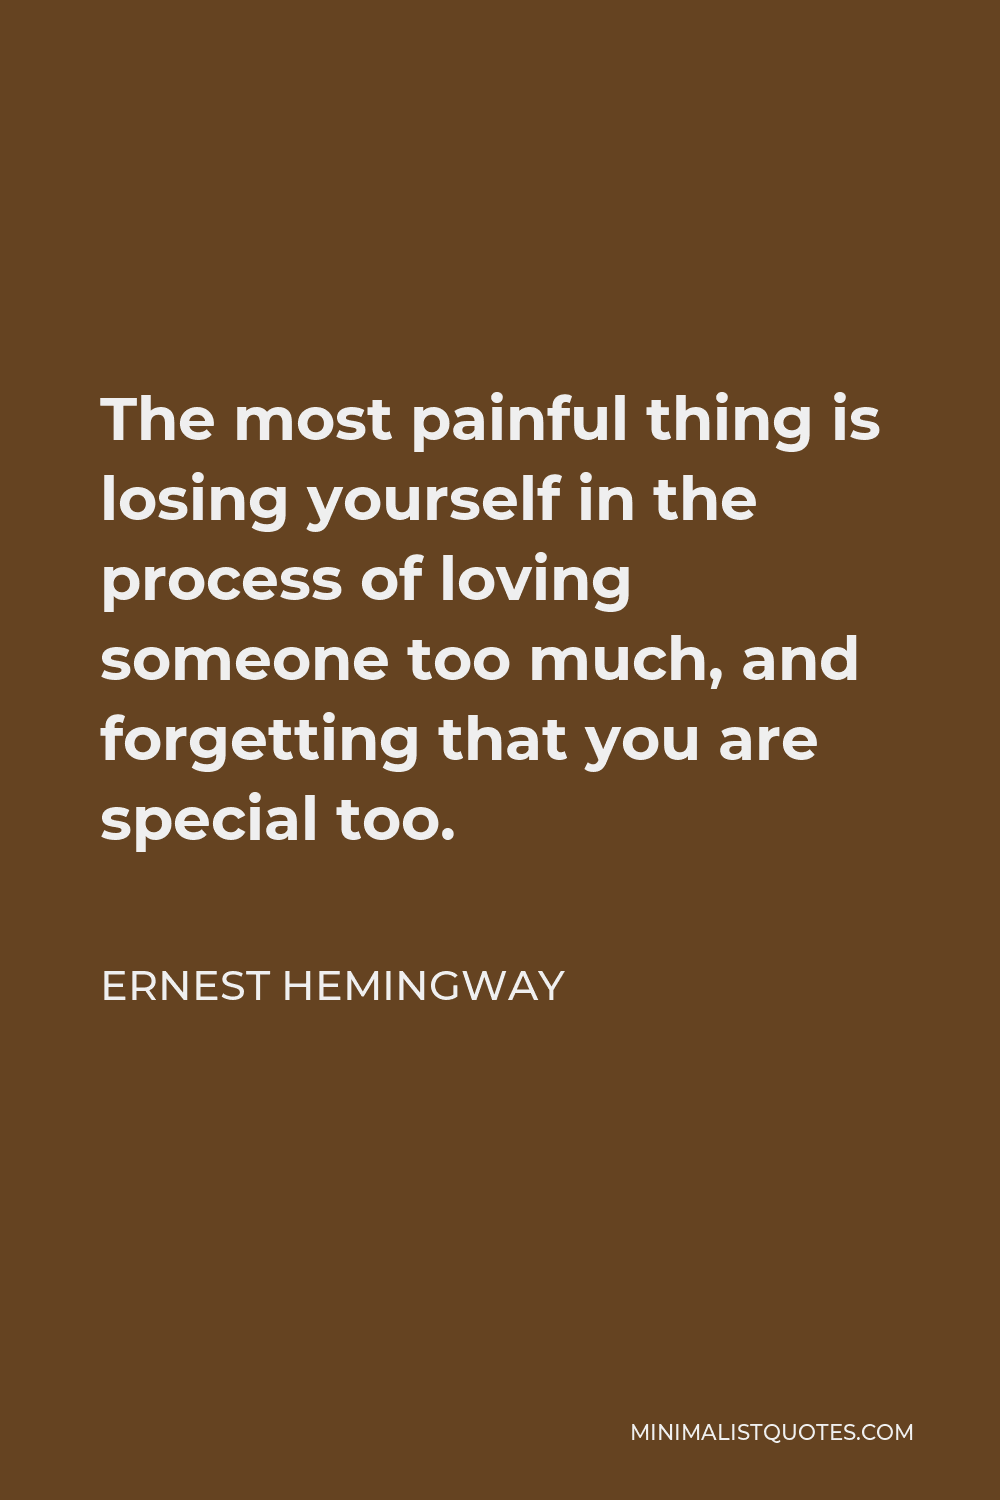 Ernest Hemingway Quote - The most painful thing is losing yourself in the process of loving someone too much, and forgetting that you are special too.